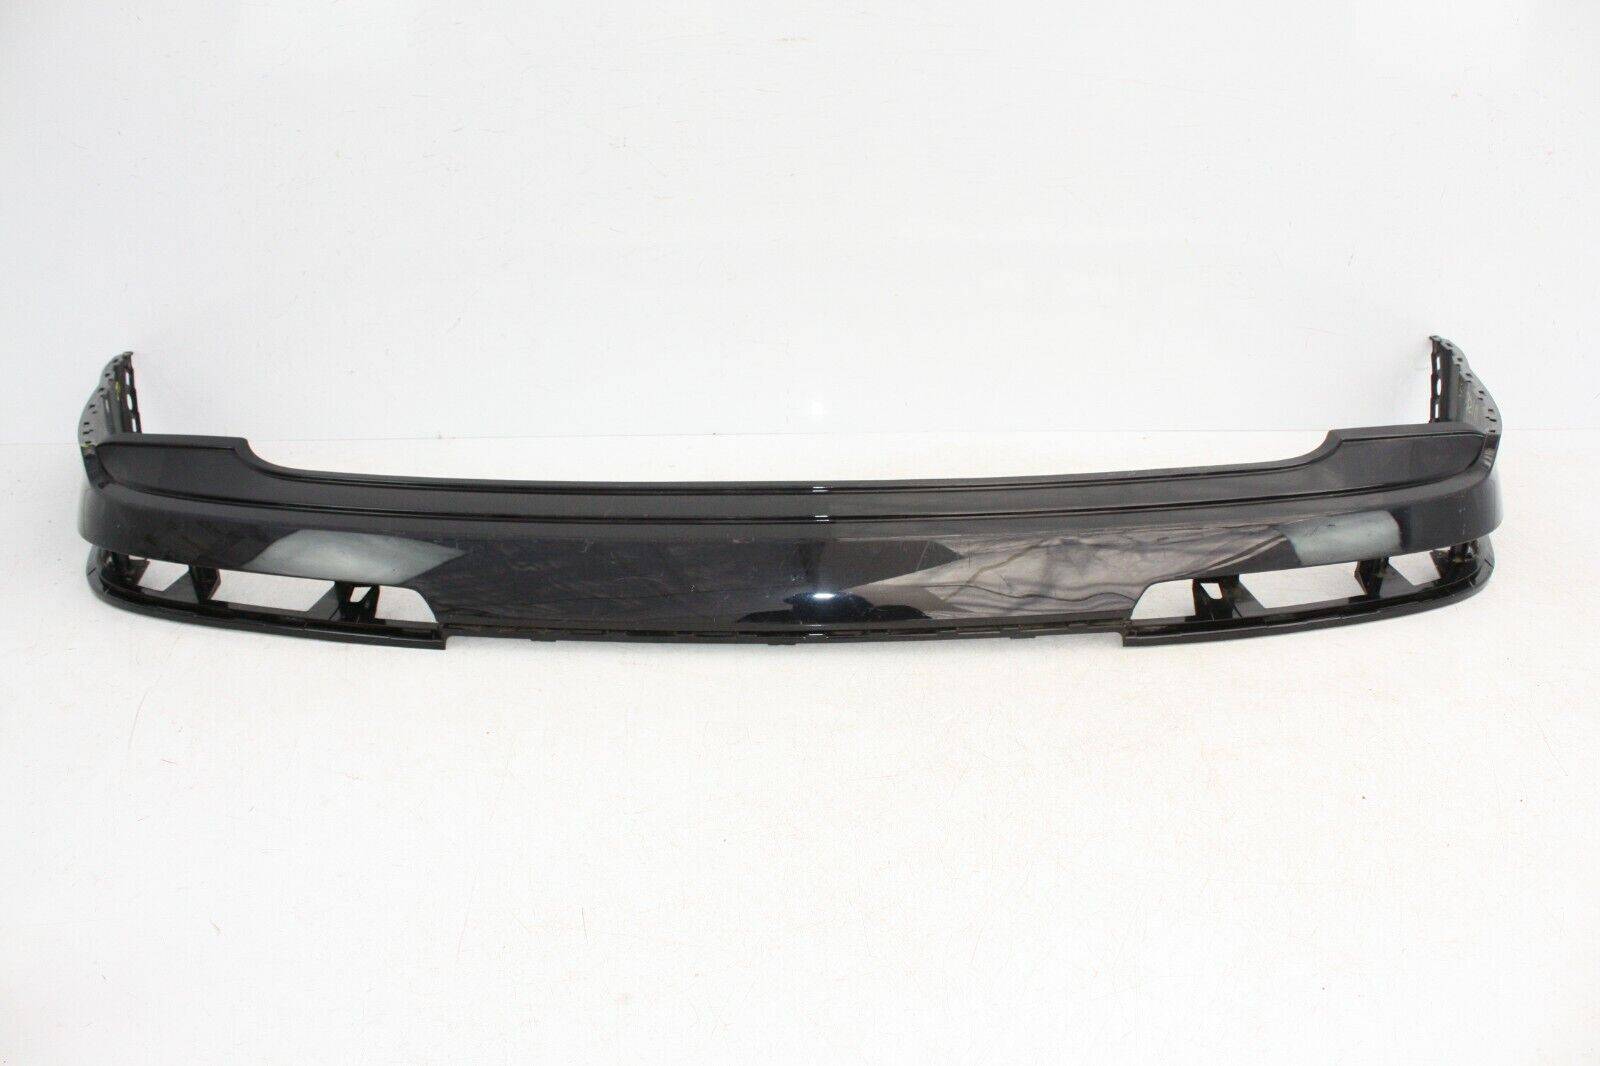 Audi Q7 S Line Rear Bumper Upper Section 2015 TO 2019 4M0807511 175902924573